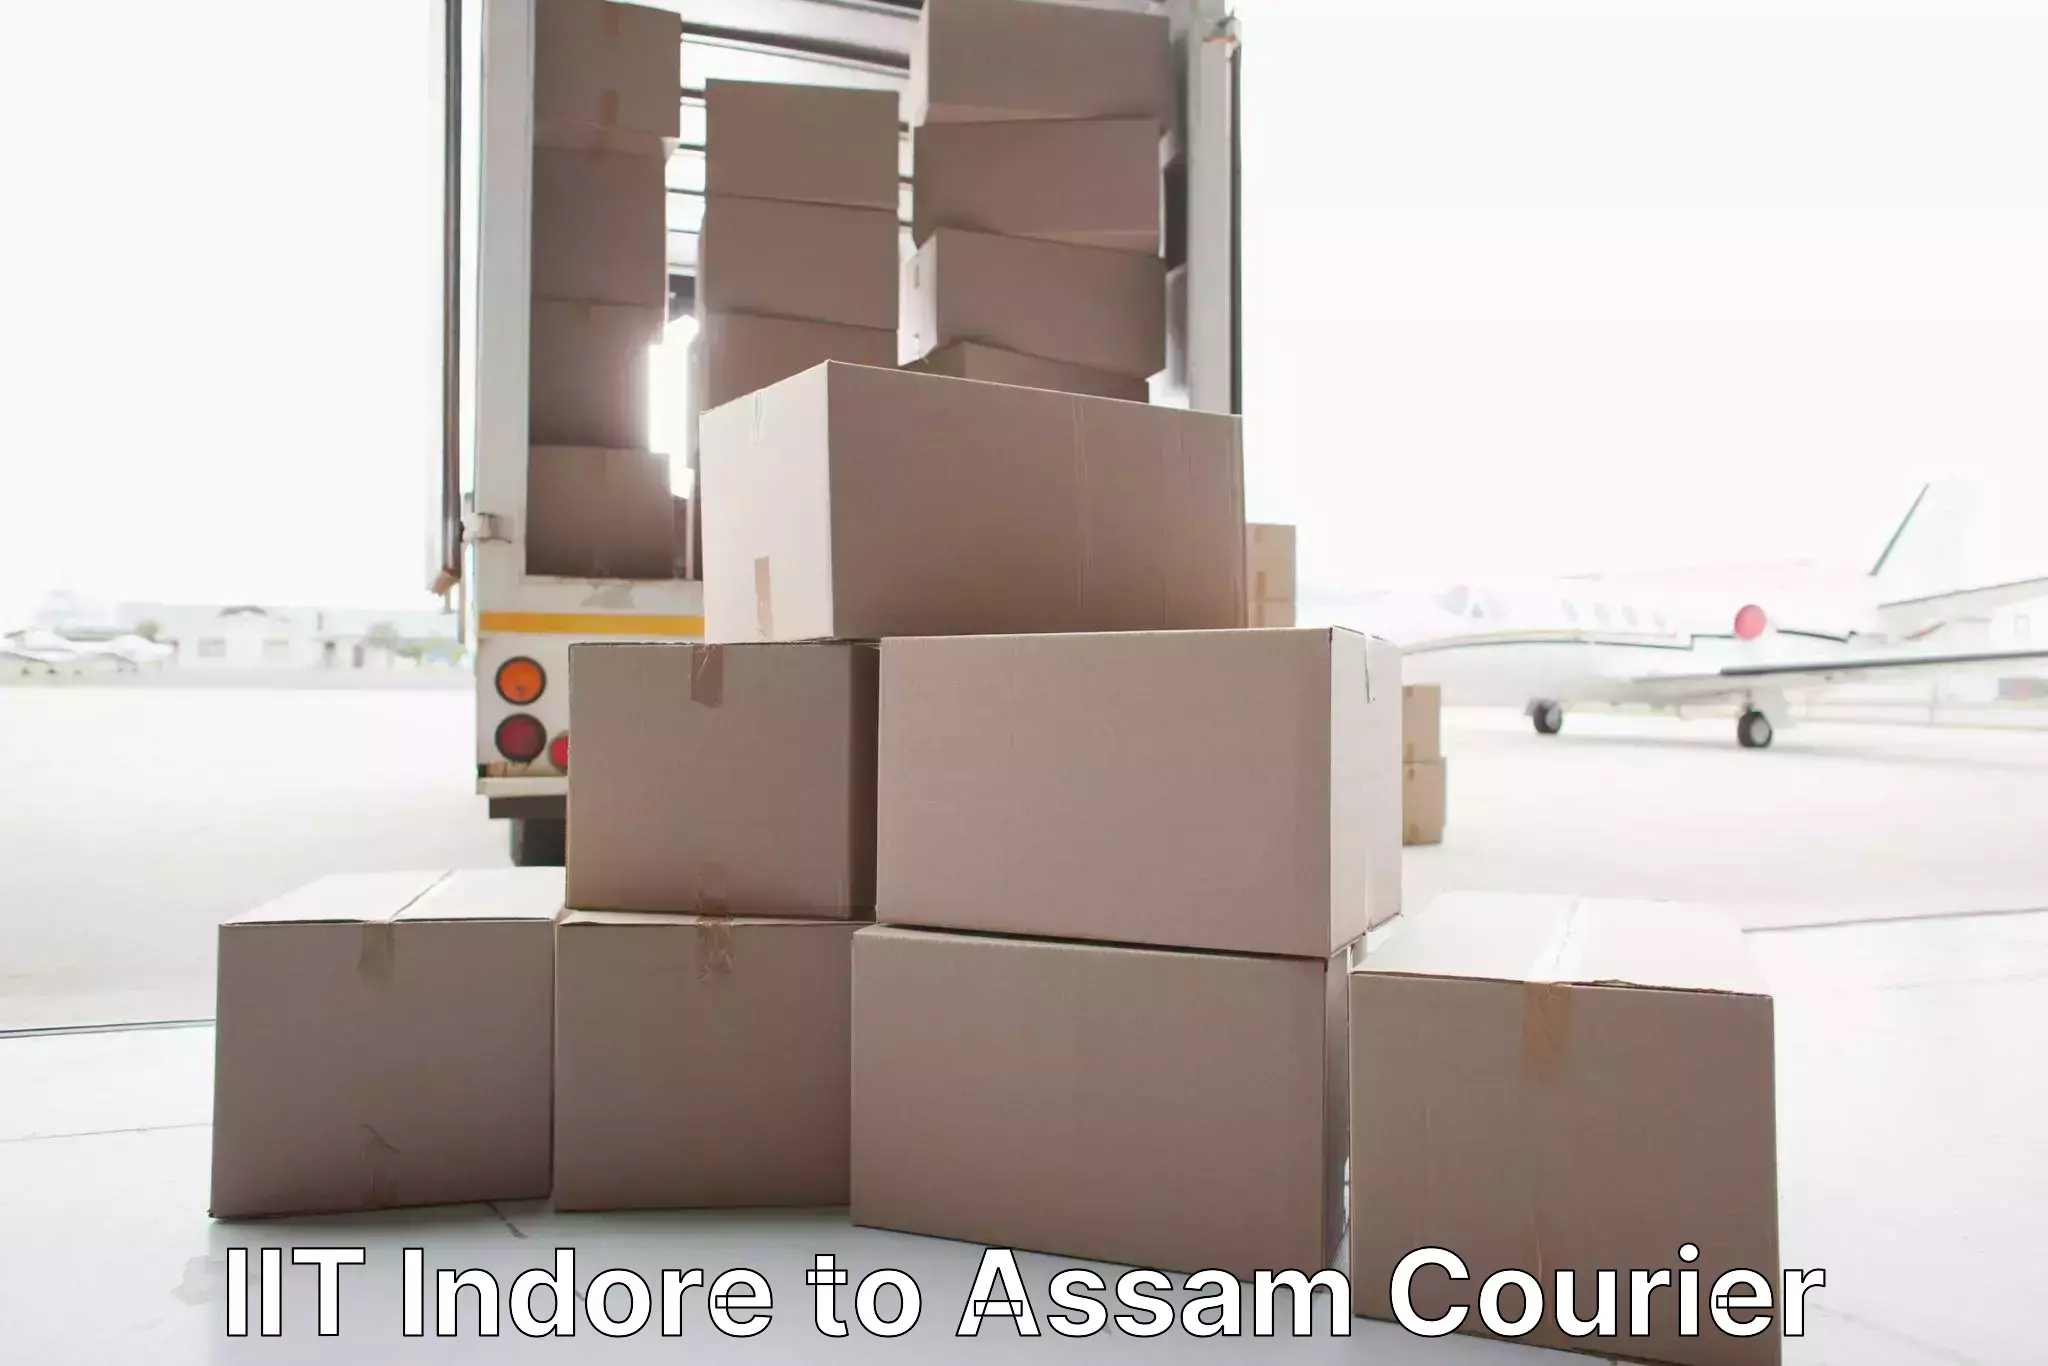 Professional movers and packers IIT Indore to Guwahati